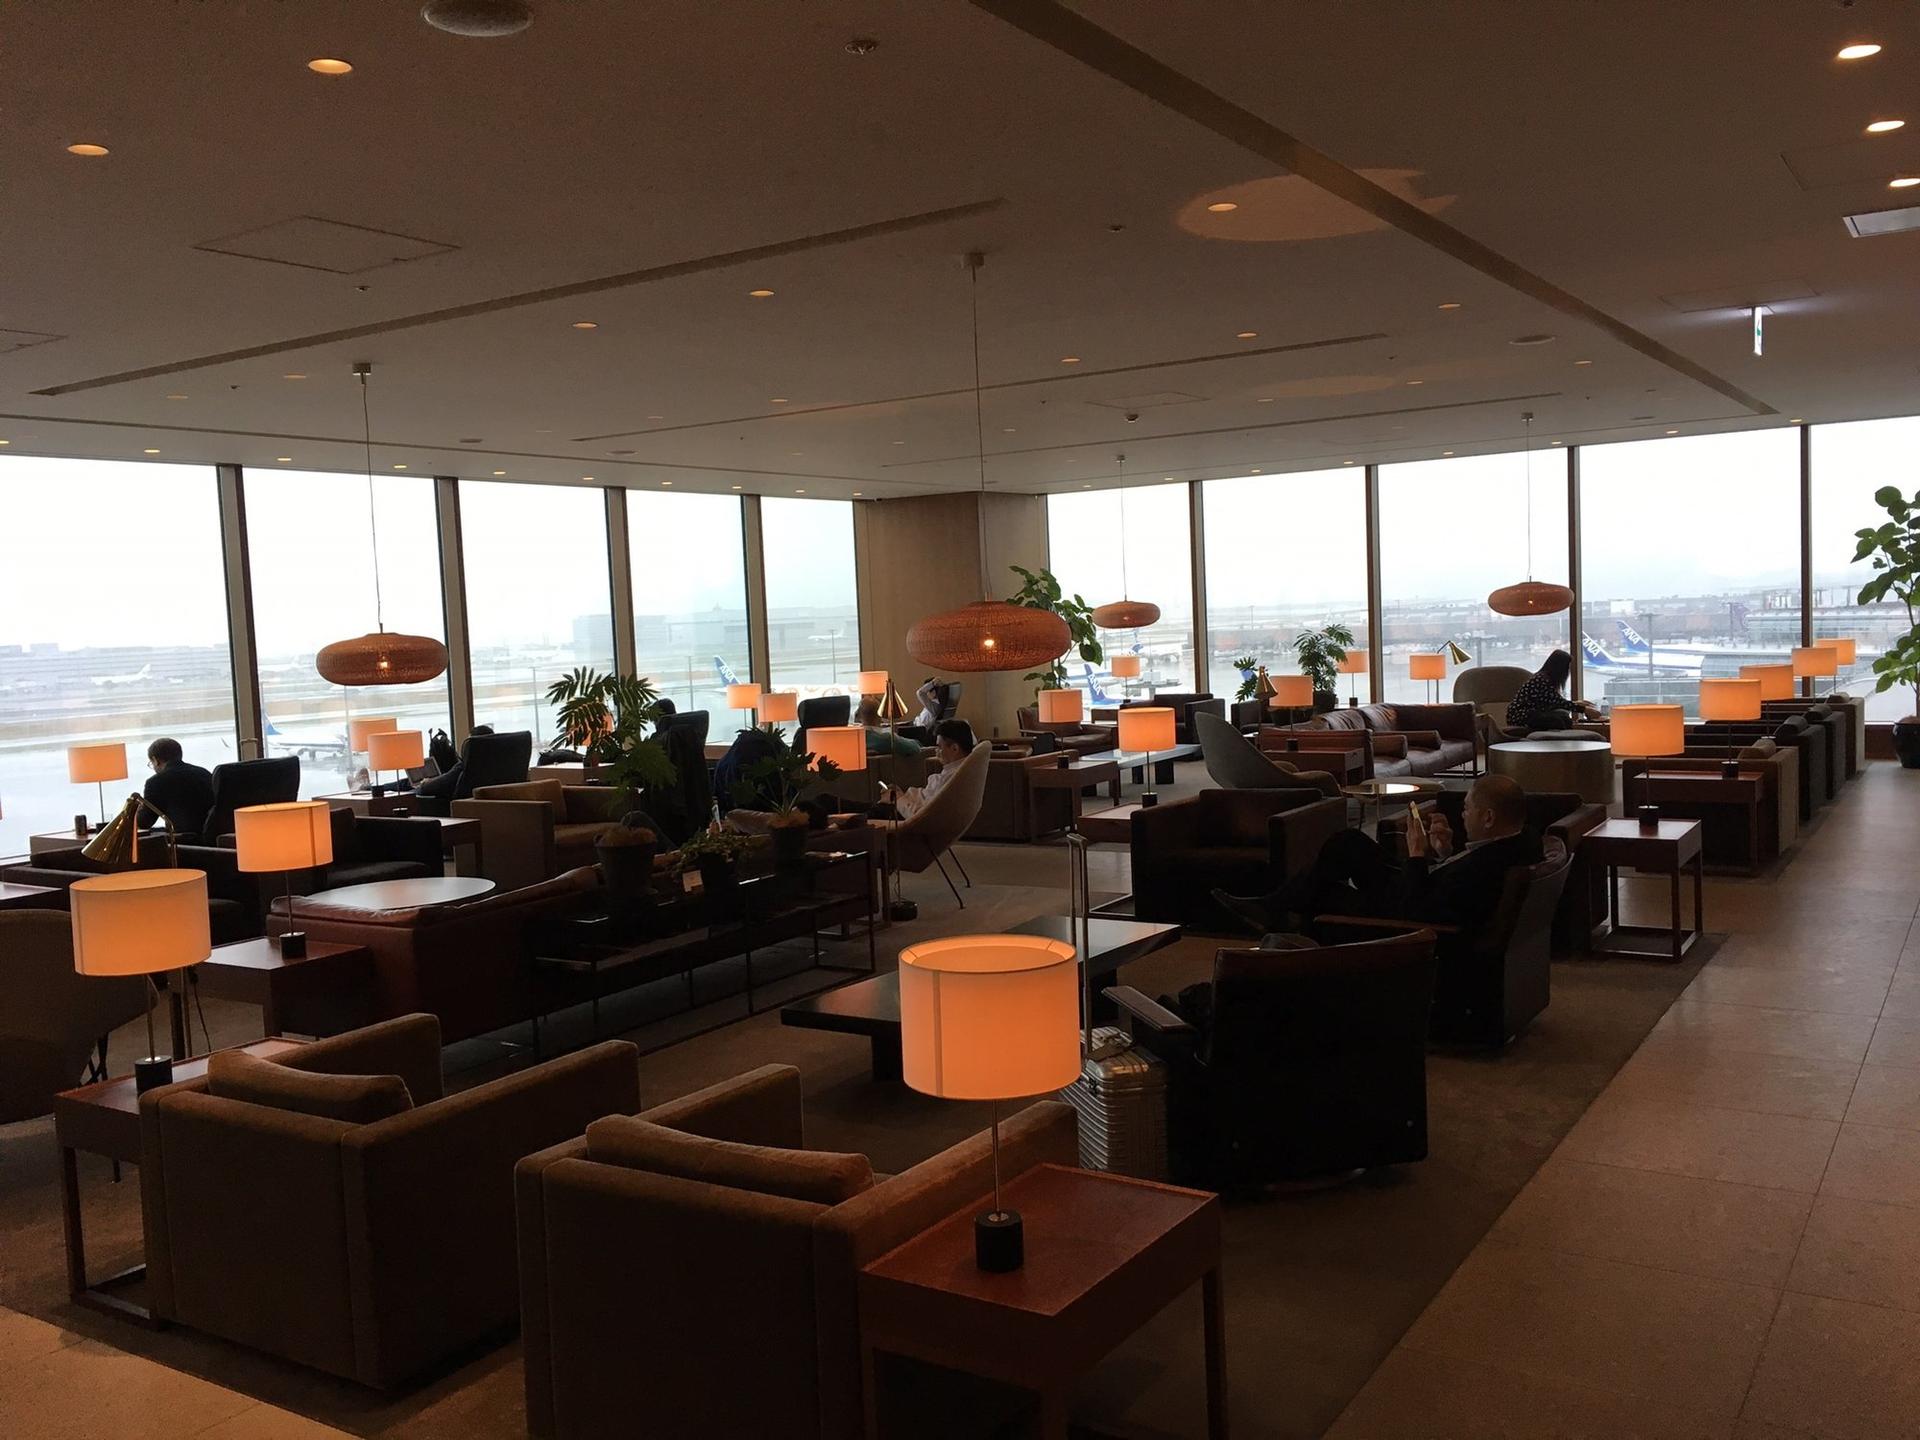 Cathay Pacific Lounge image 15 of 49